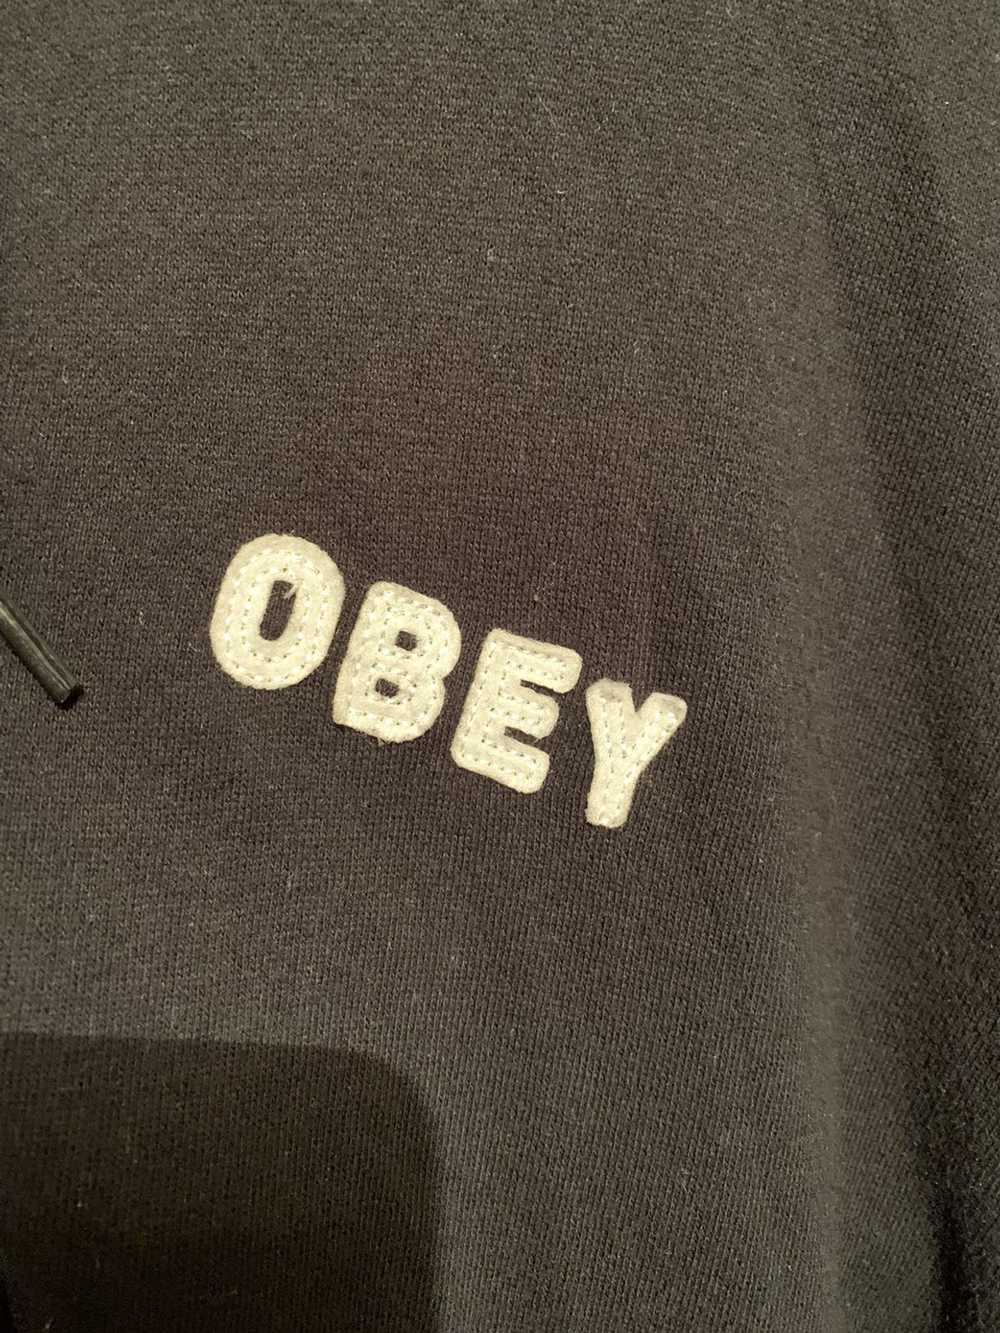 Obey Comfy French terry OBEY zip hoodie - image 2